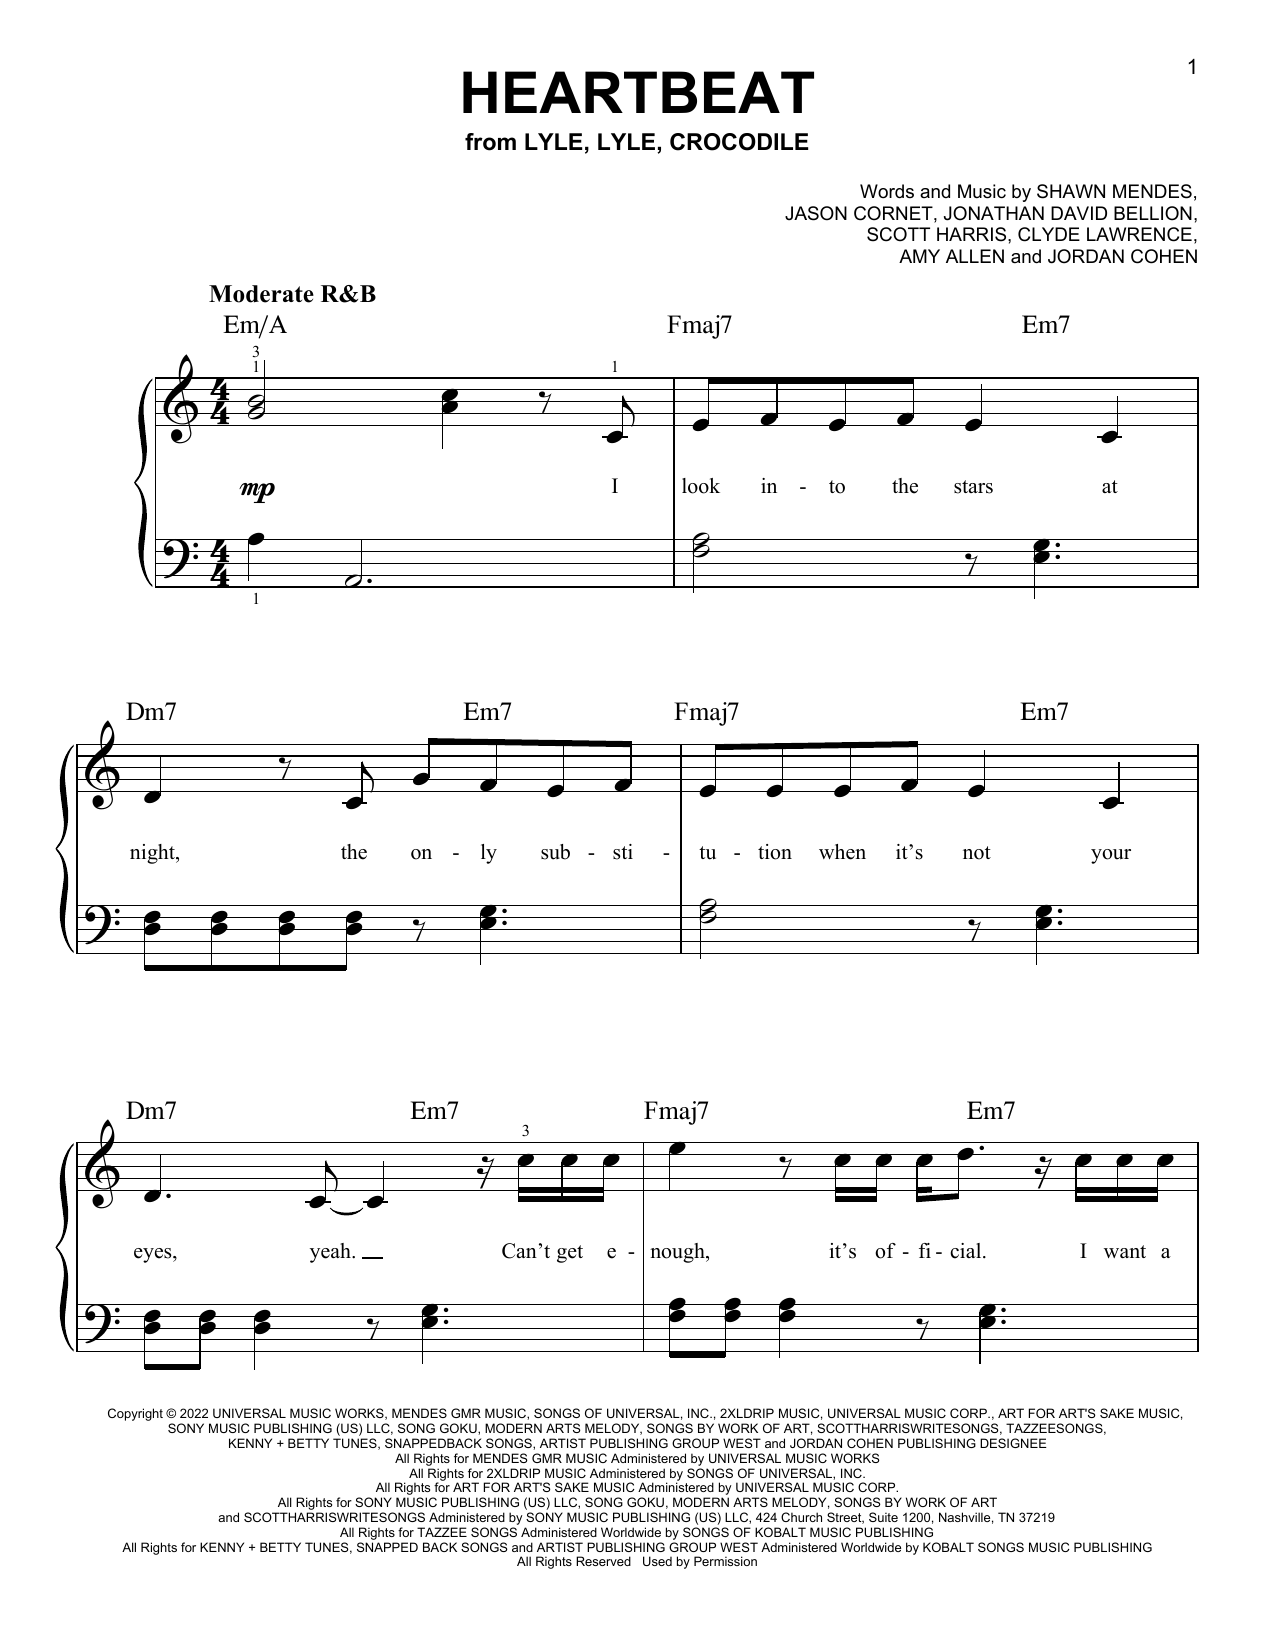 Download Shawn Mendes Heartbeat (from Lyle, Lyle, Crocodile) Sheet Music